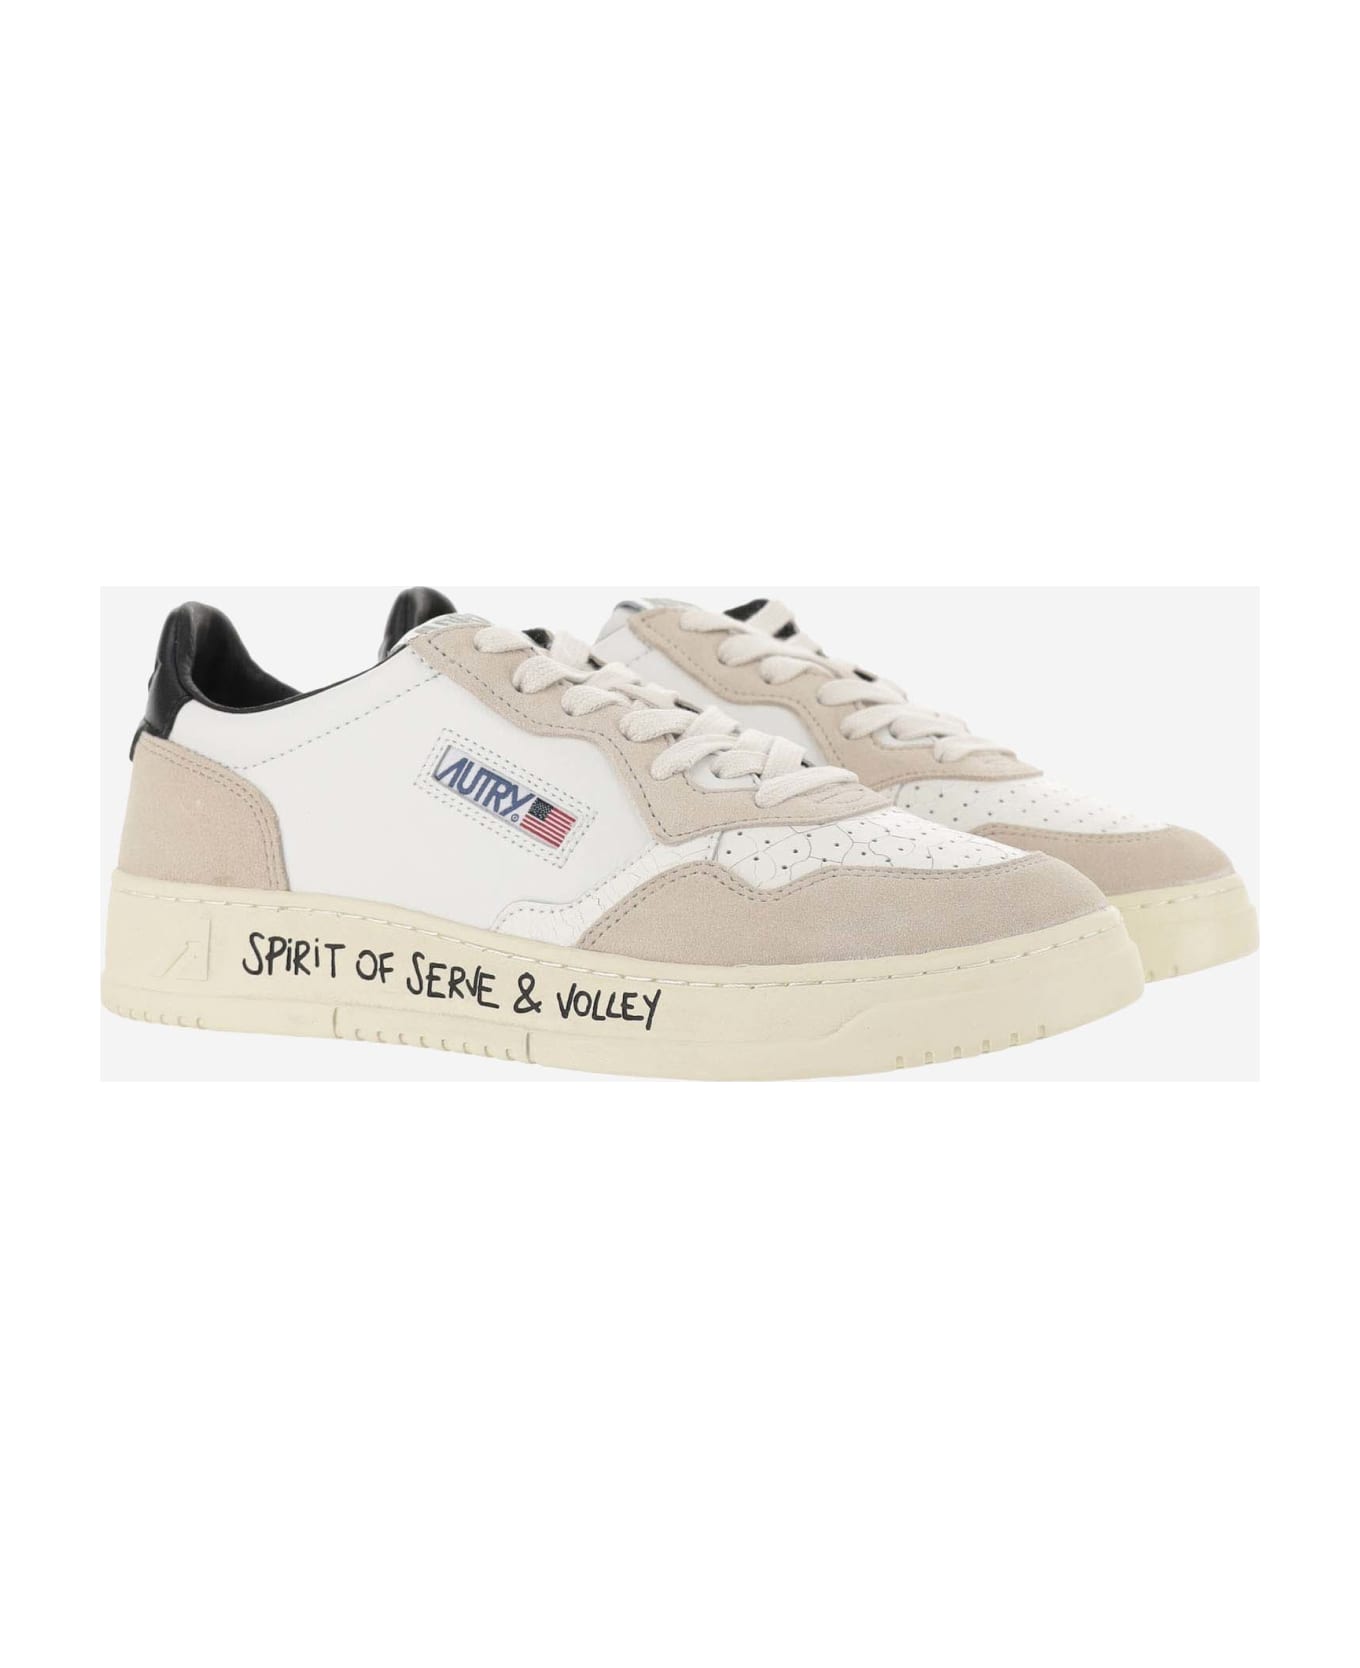 Autry Low Medalist Spirit Of Serve & Volley Sneakers - Bianco スニーカー